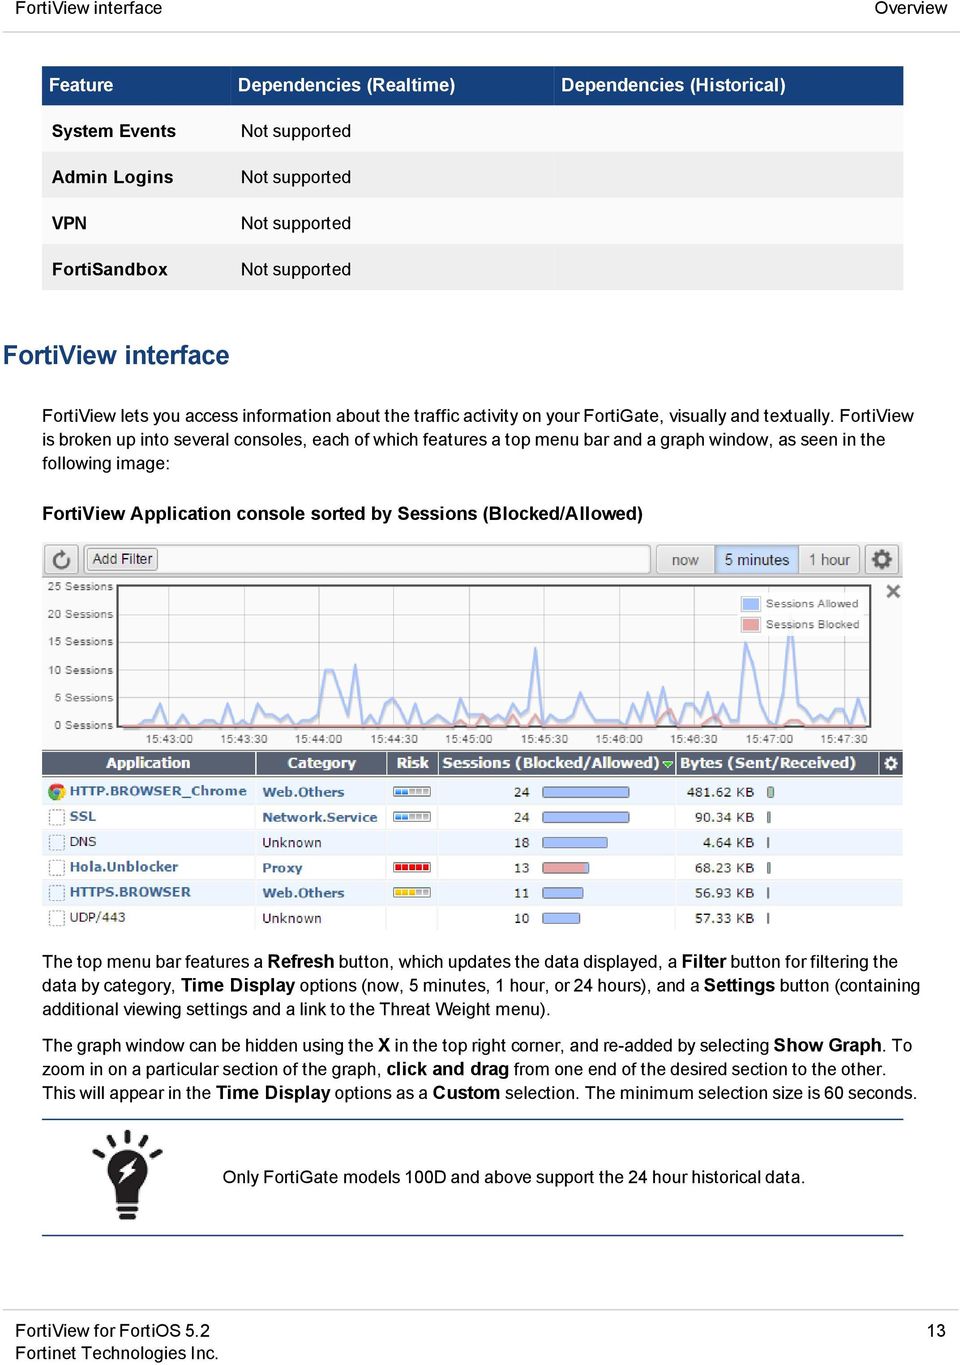 FortiView is broken up into several consoles, each of which features a top menu bar and a graph window, as seen in the following image: FortiView Application console sorted by Sessions